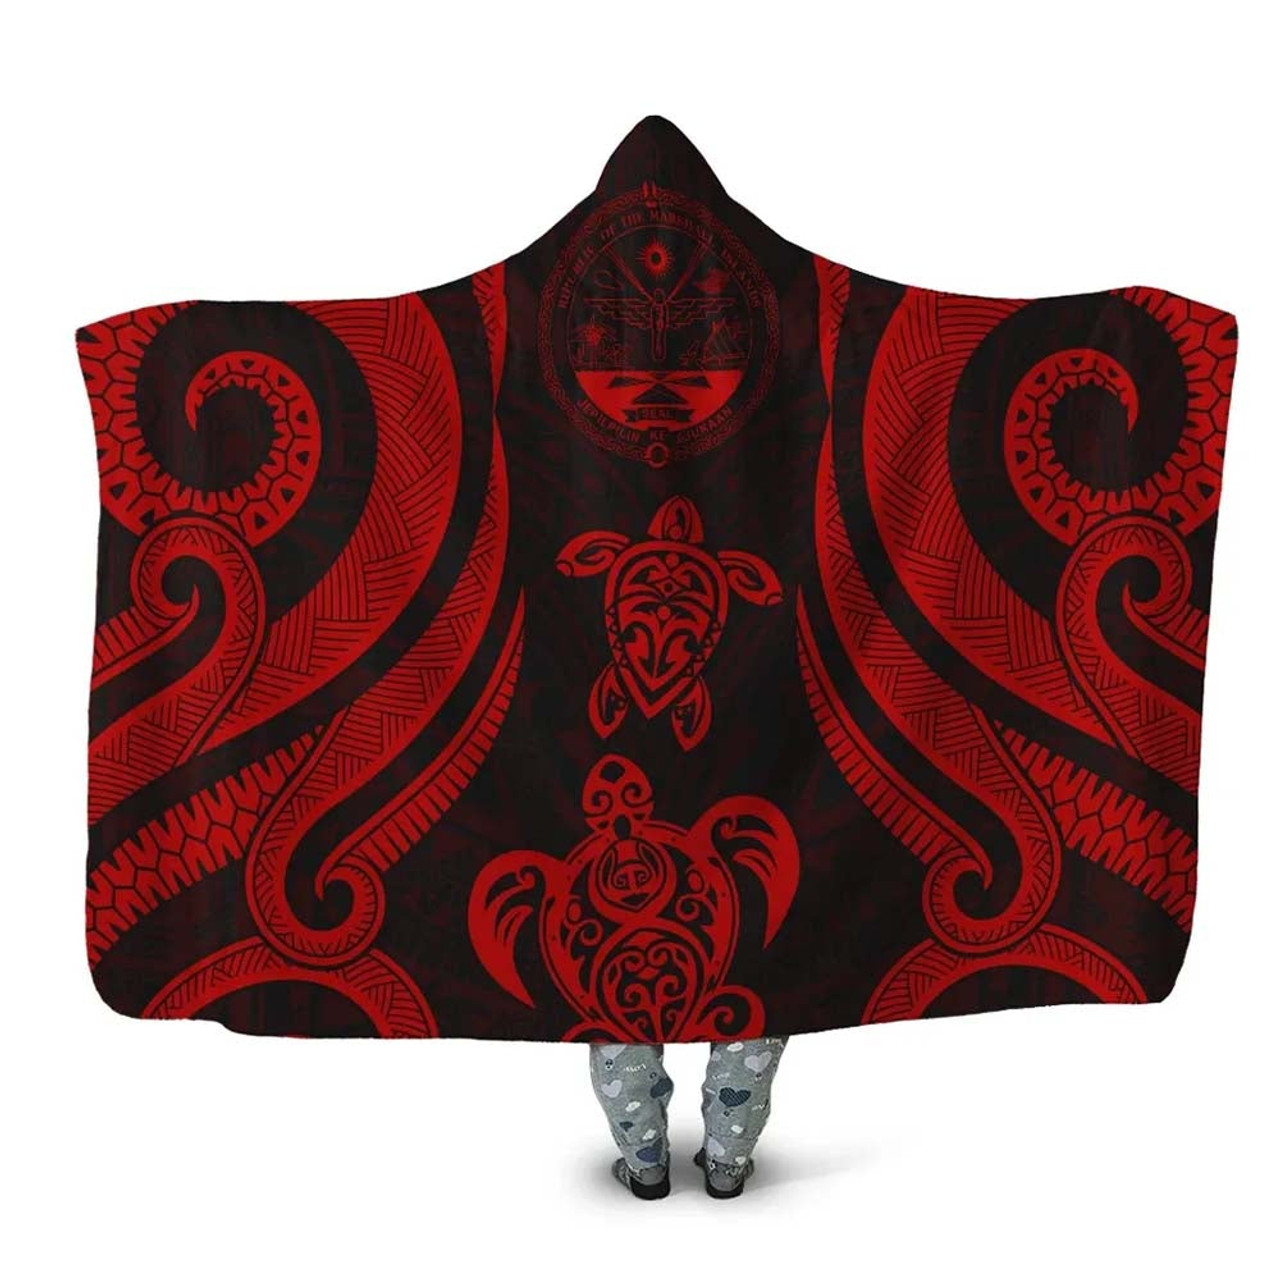 Marshall Islands Hooded Blanket - Red Tentacle Turtle Crest 1